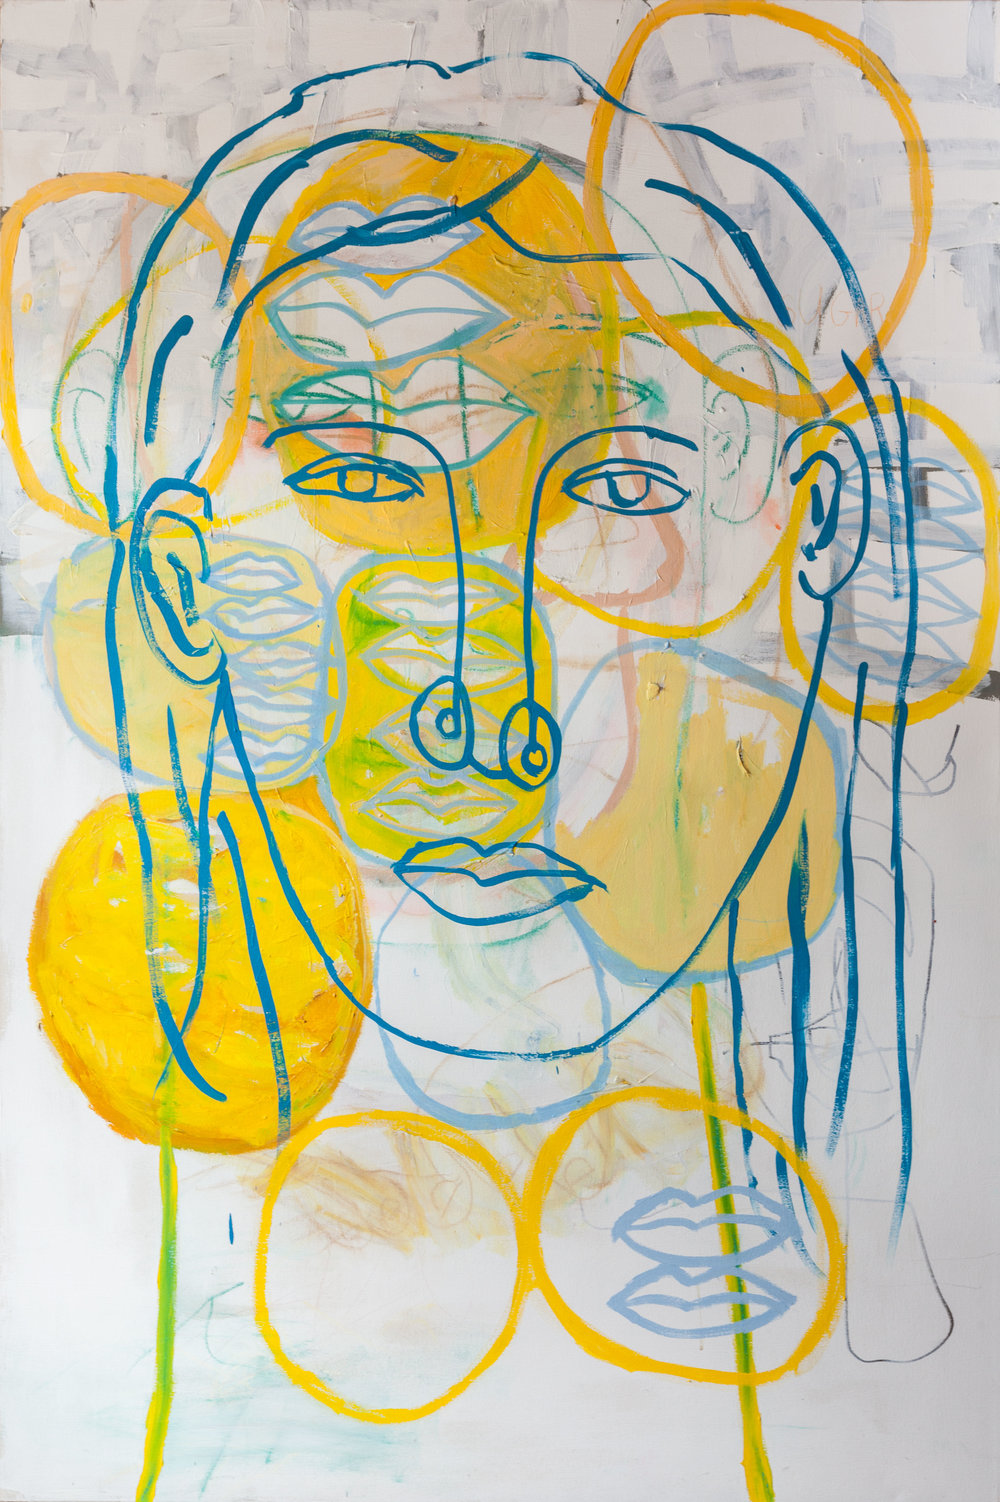 Woman’s Head - Acrylic and marker on canvas72 x 48 inchesSOLD(Click on image for detail)